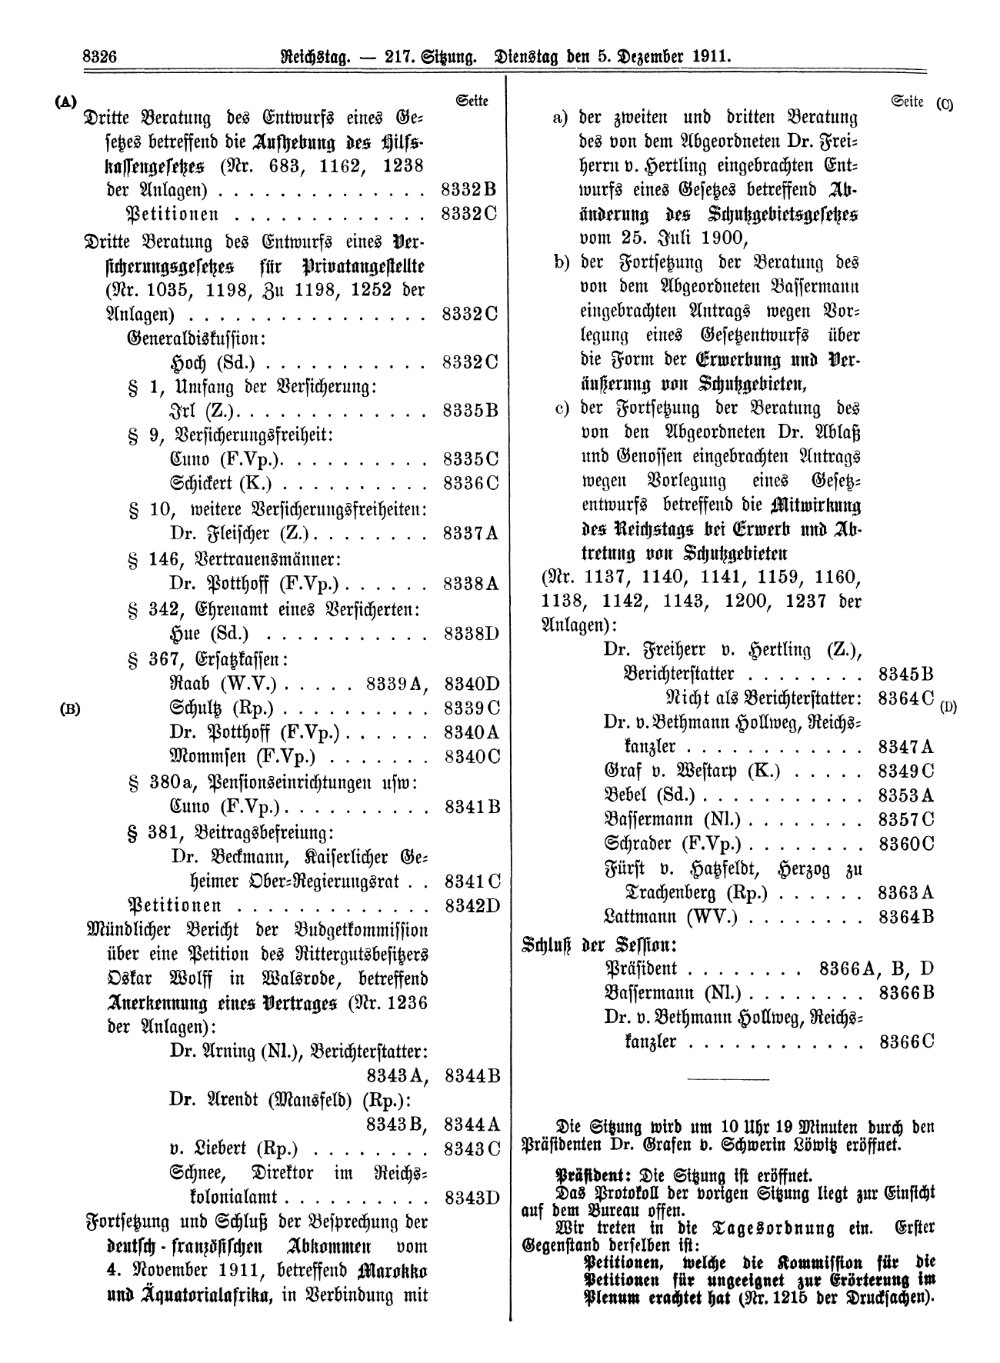 Scan of page 8326